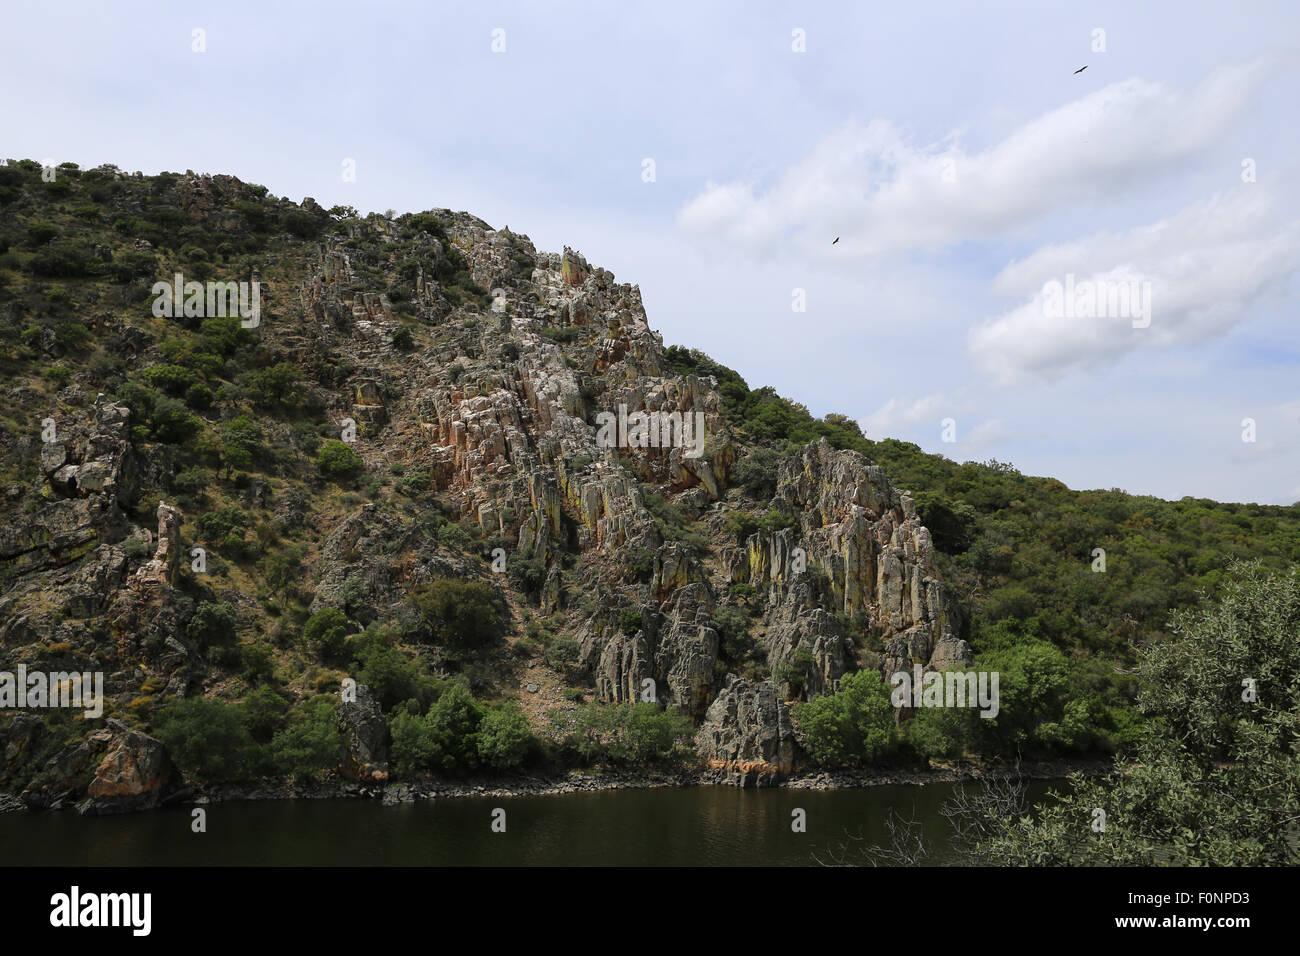 Portilla del Tietar, viewpoint for vultures in the Monfrague National Park, Extremadura, Spain Stock Photo